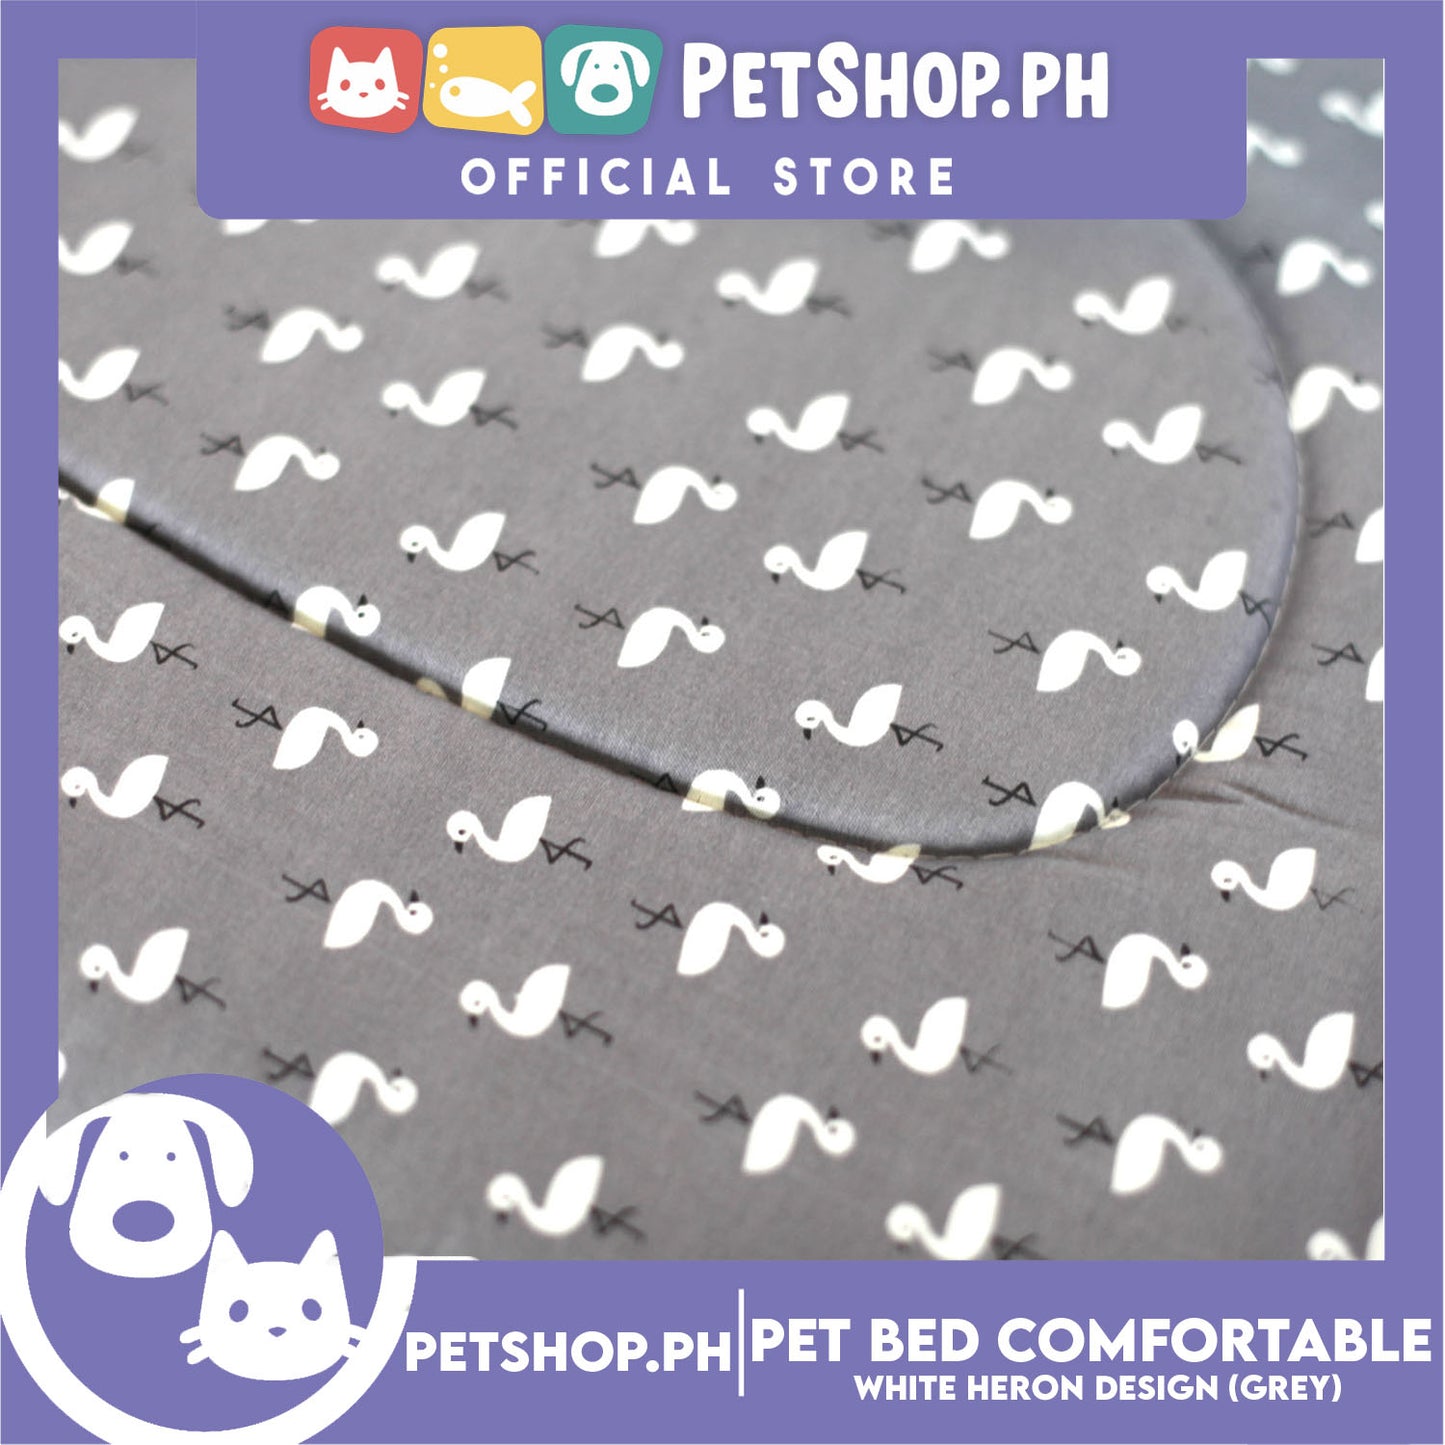 Pet Bed Comfortable Sleeping Bed with White Heron Design 62x50x15cm for Dogs & Cats Grey